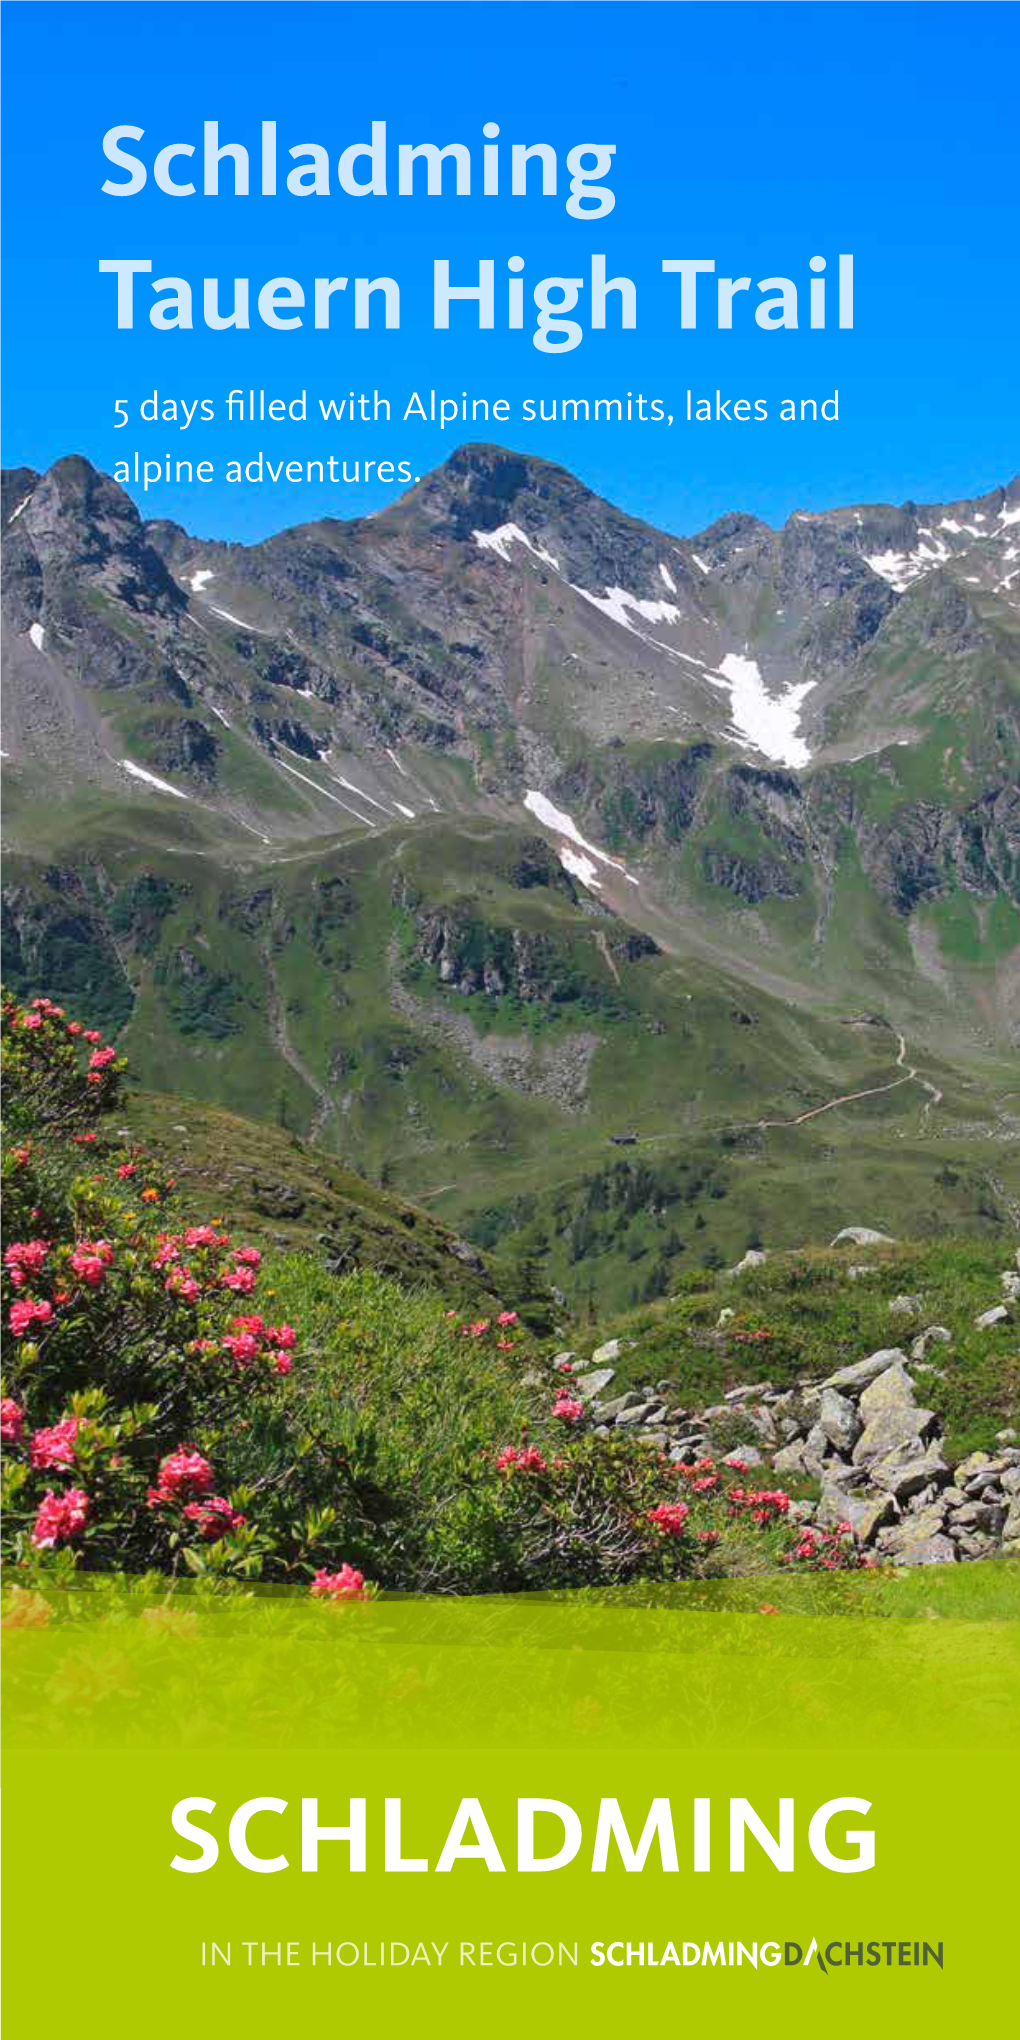 Schladming Tauern High Trail 5 Days Filled with Alpine Summits, Lakes and Alpine Adventures